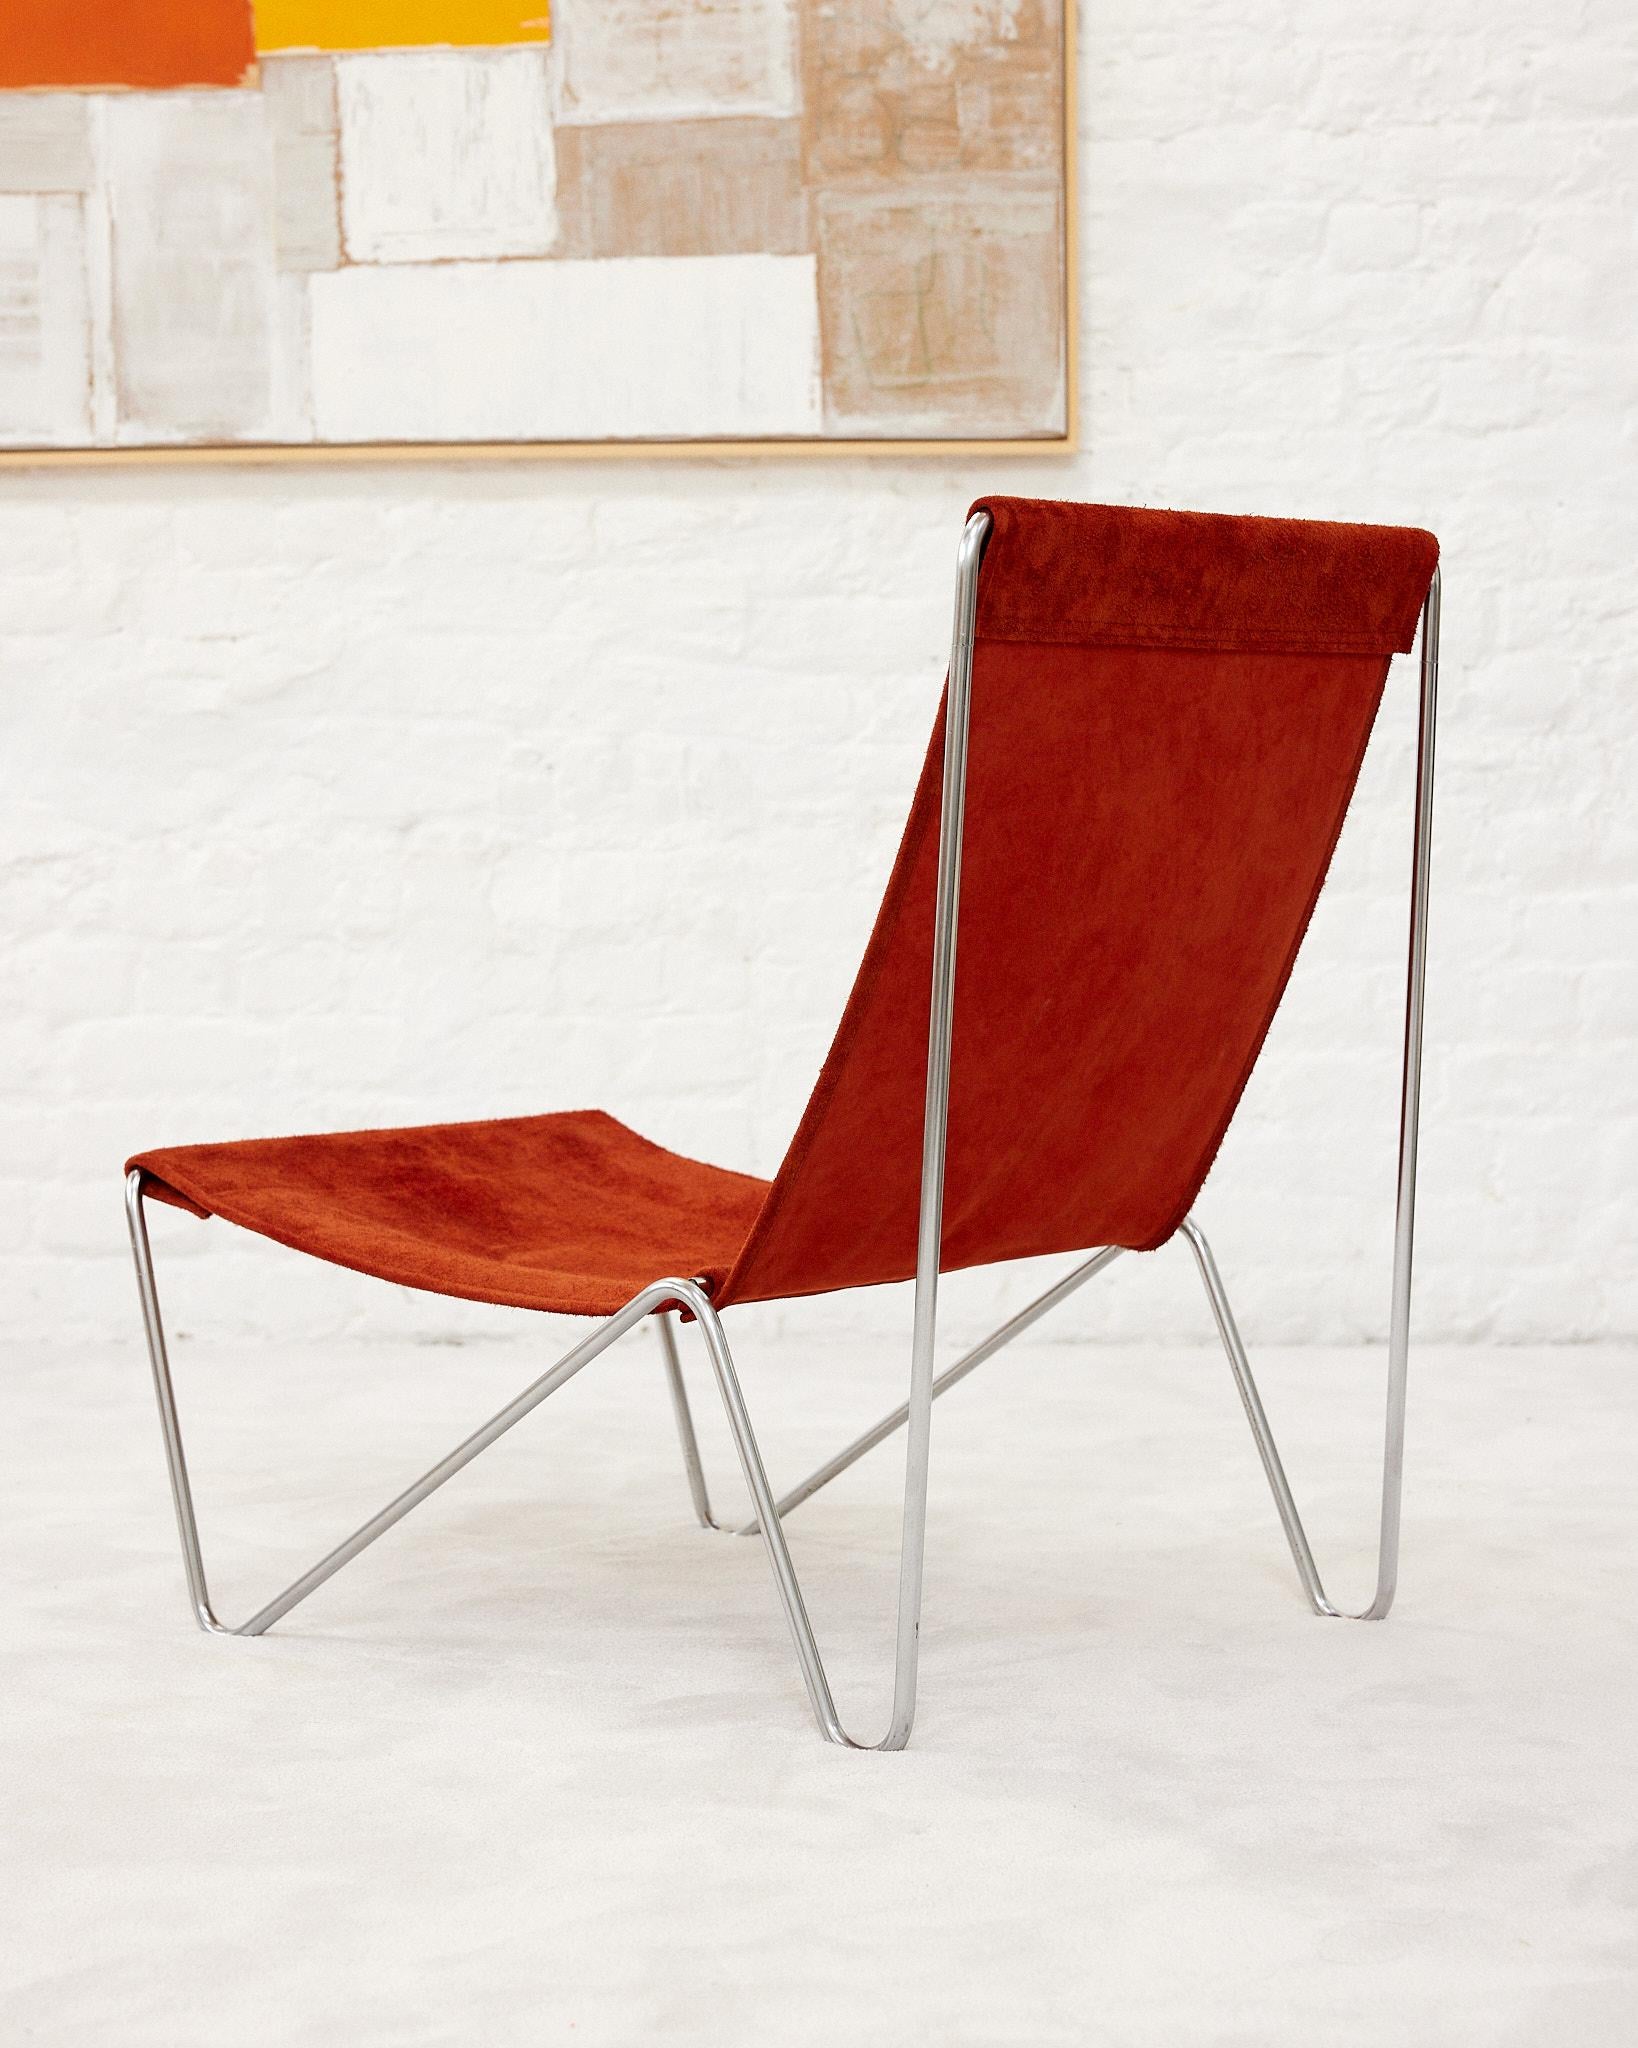 The “Bachelor” chair has been known as being the first success of Verner Panton. An original Fritz Hansen work designed and created in 1953. The chair was marketed toward businesses, and known as “Bachelor” chair because they were intended for